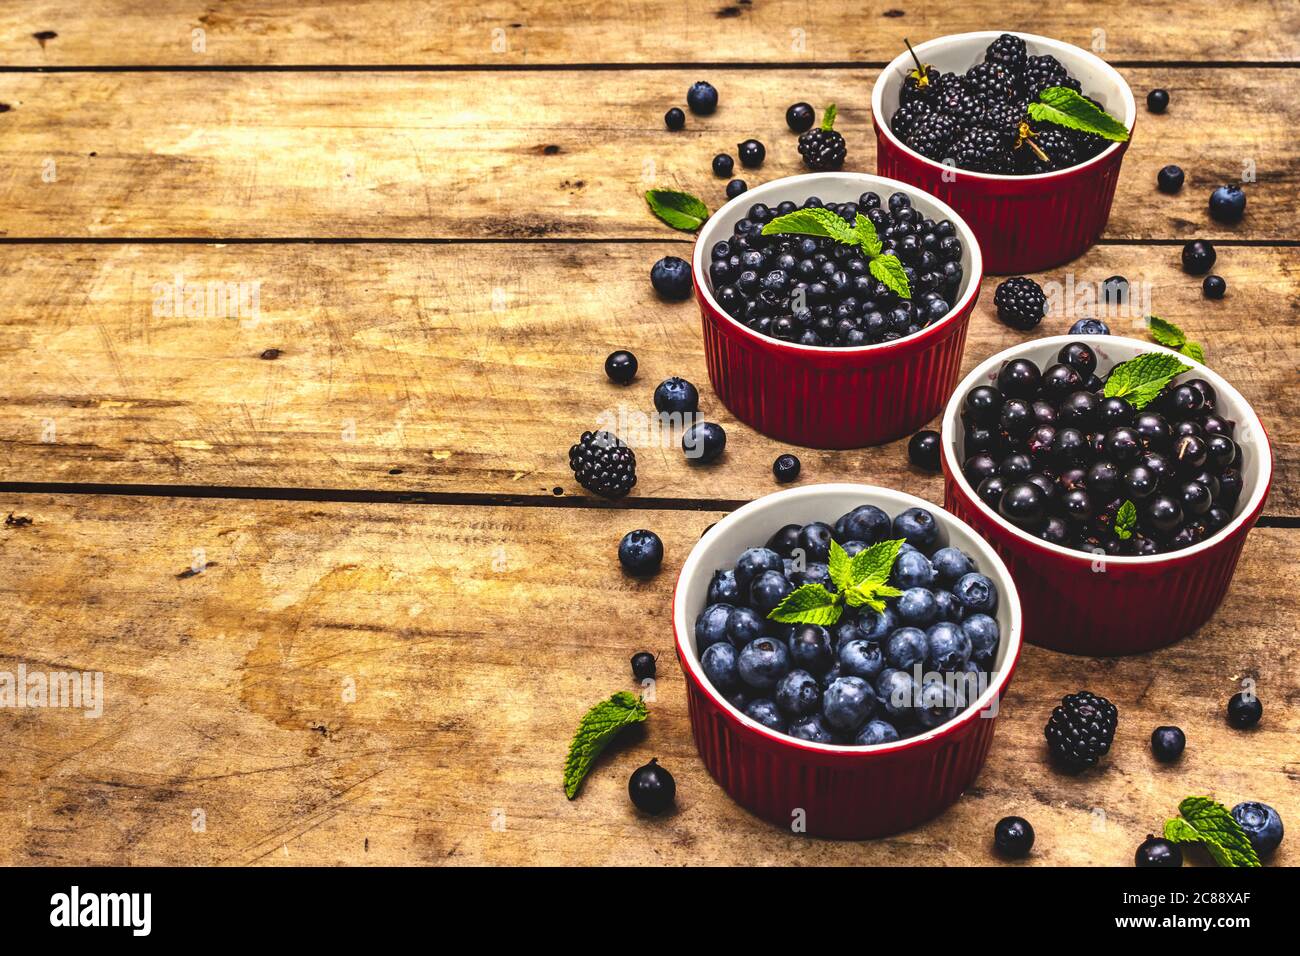 Assorted berries in blue and black colors: bilberry, blueberry, currant and blackberry. Old wooden table background, copy space Stock Photo